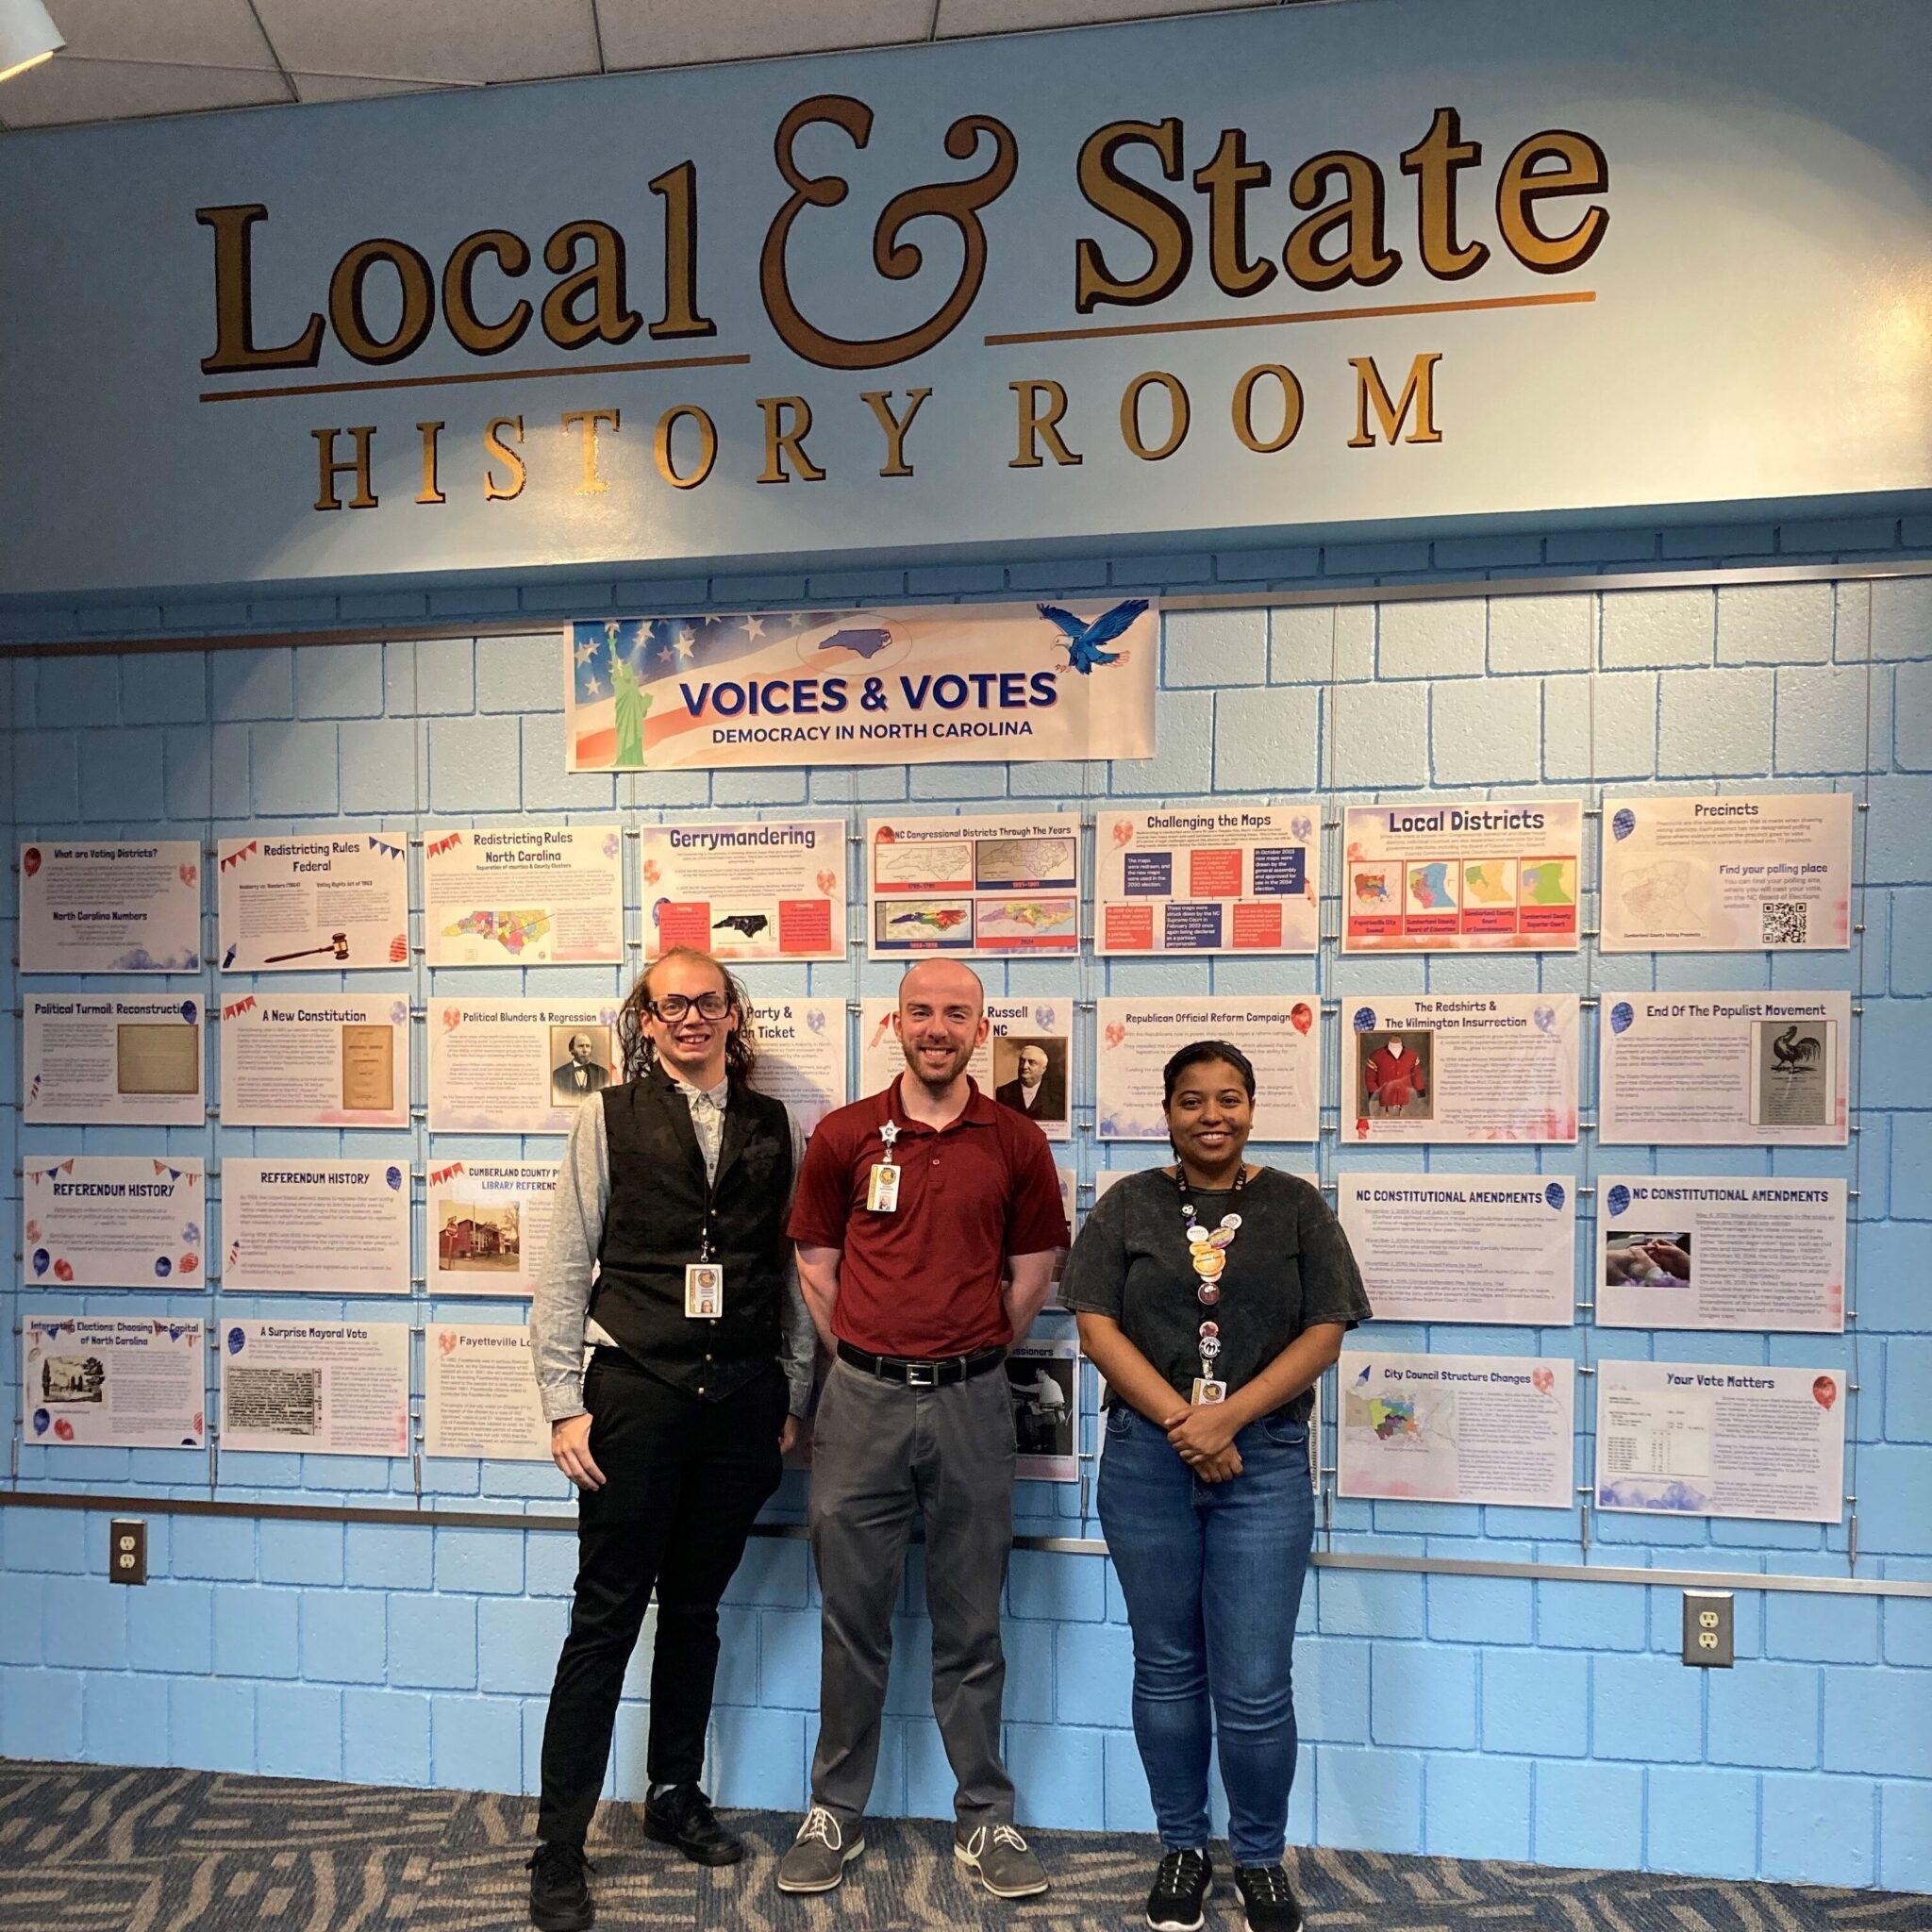 Three people stand in front of wall that reads "Local and State History Room"